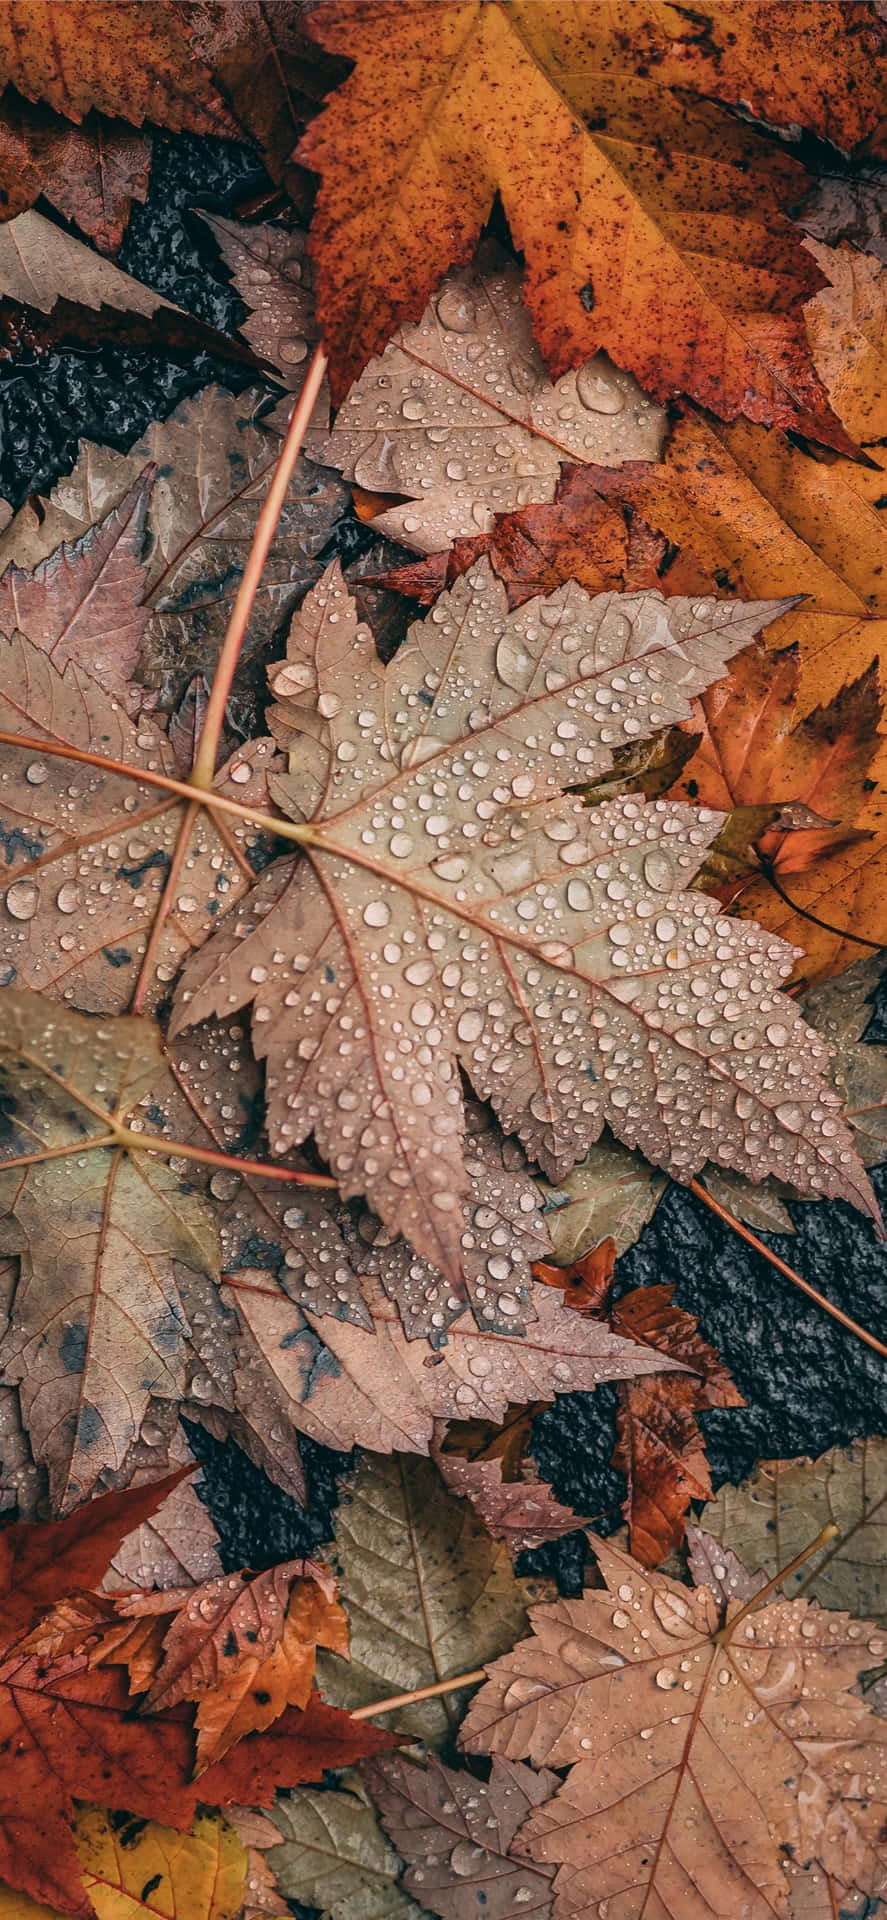 Fall Tumblr Water Droplets In Dried Leaves Wallpaper